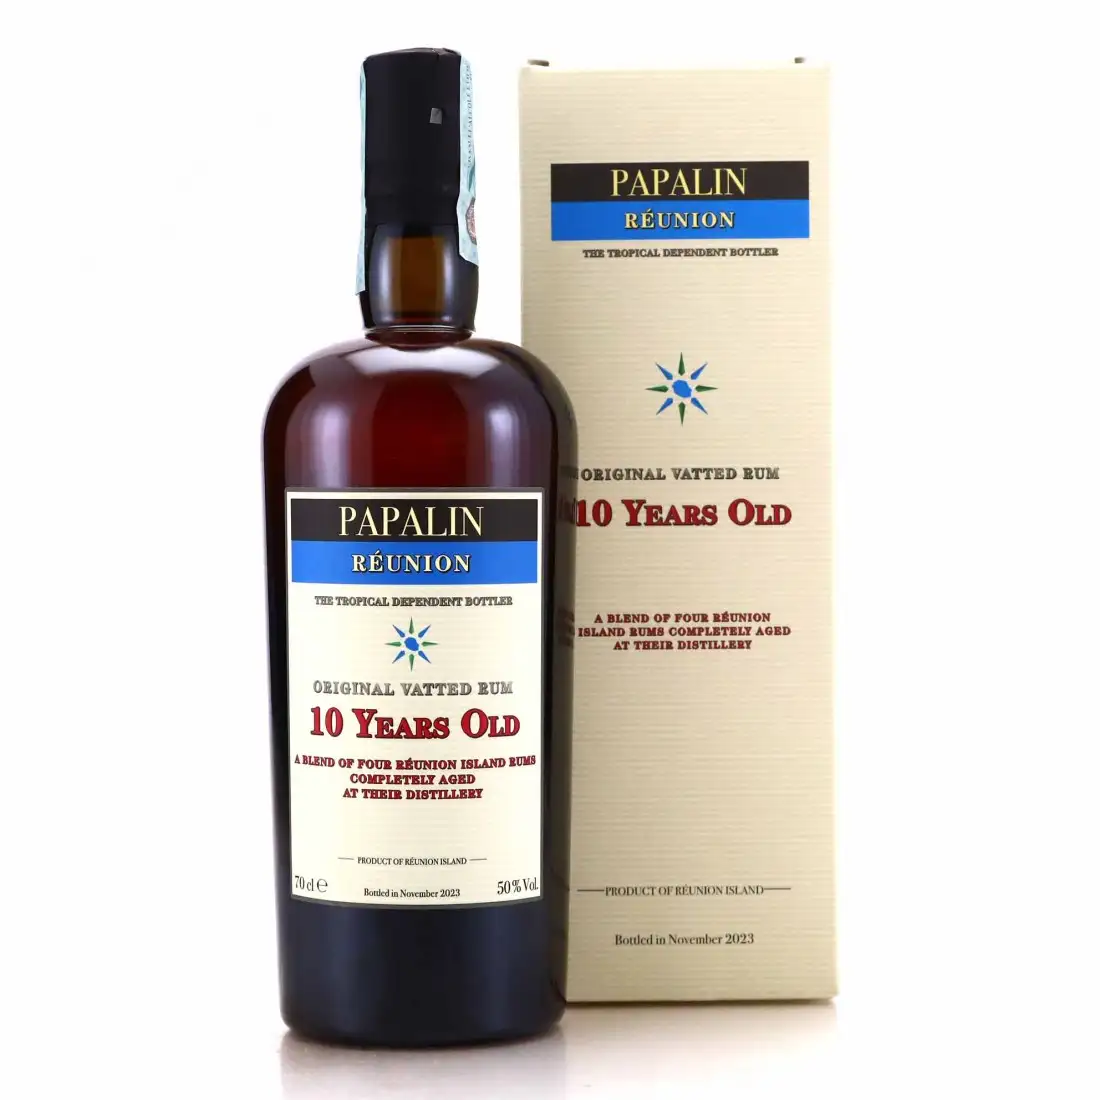 Image of the front of the bottle of the rum Papalin Réunion